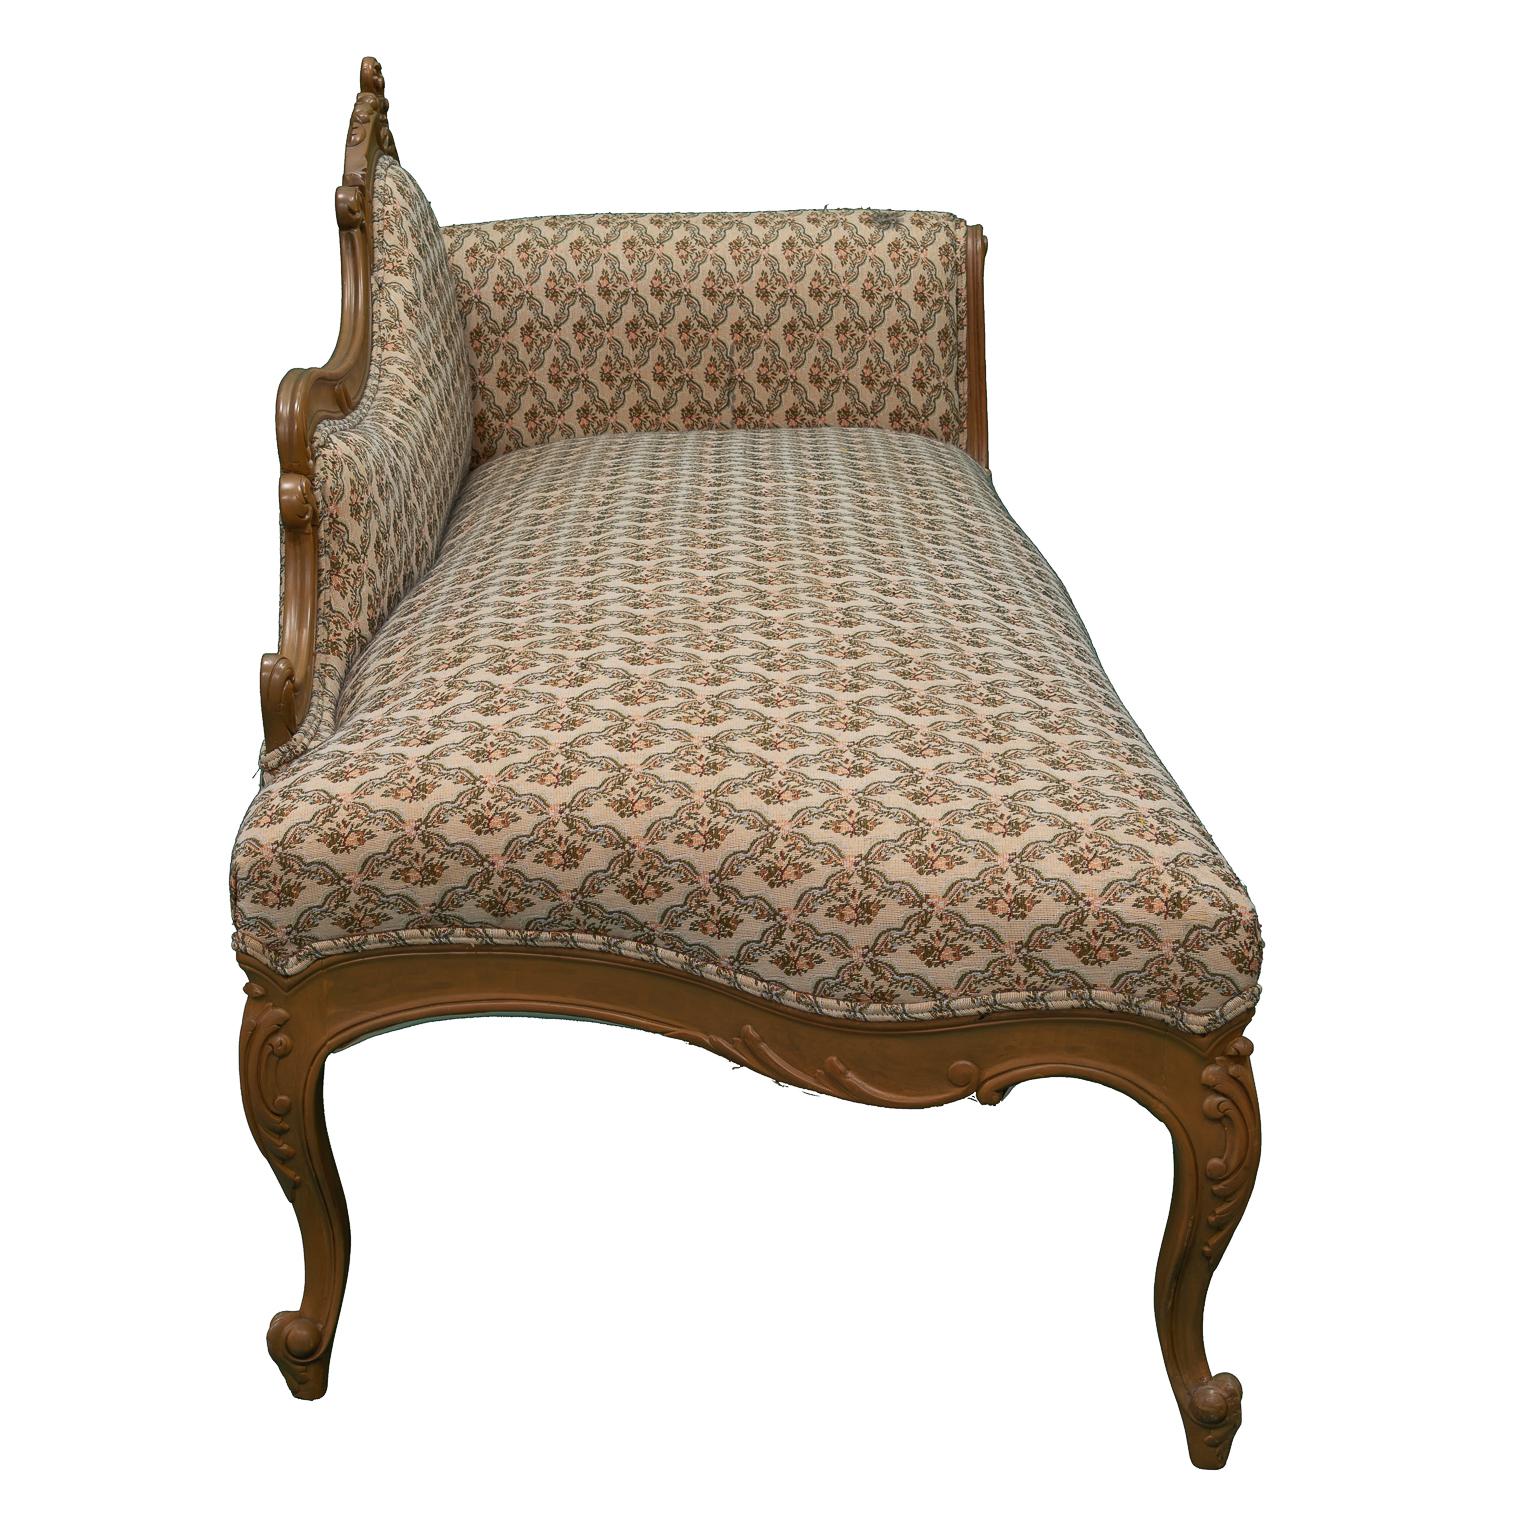 Chaise lounge French style Louis XV with the vintage tapestry of the 19th century.